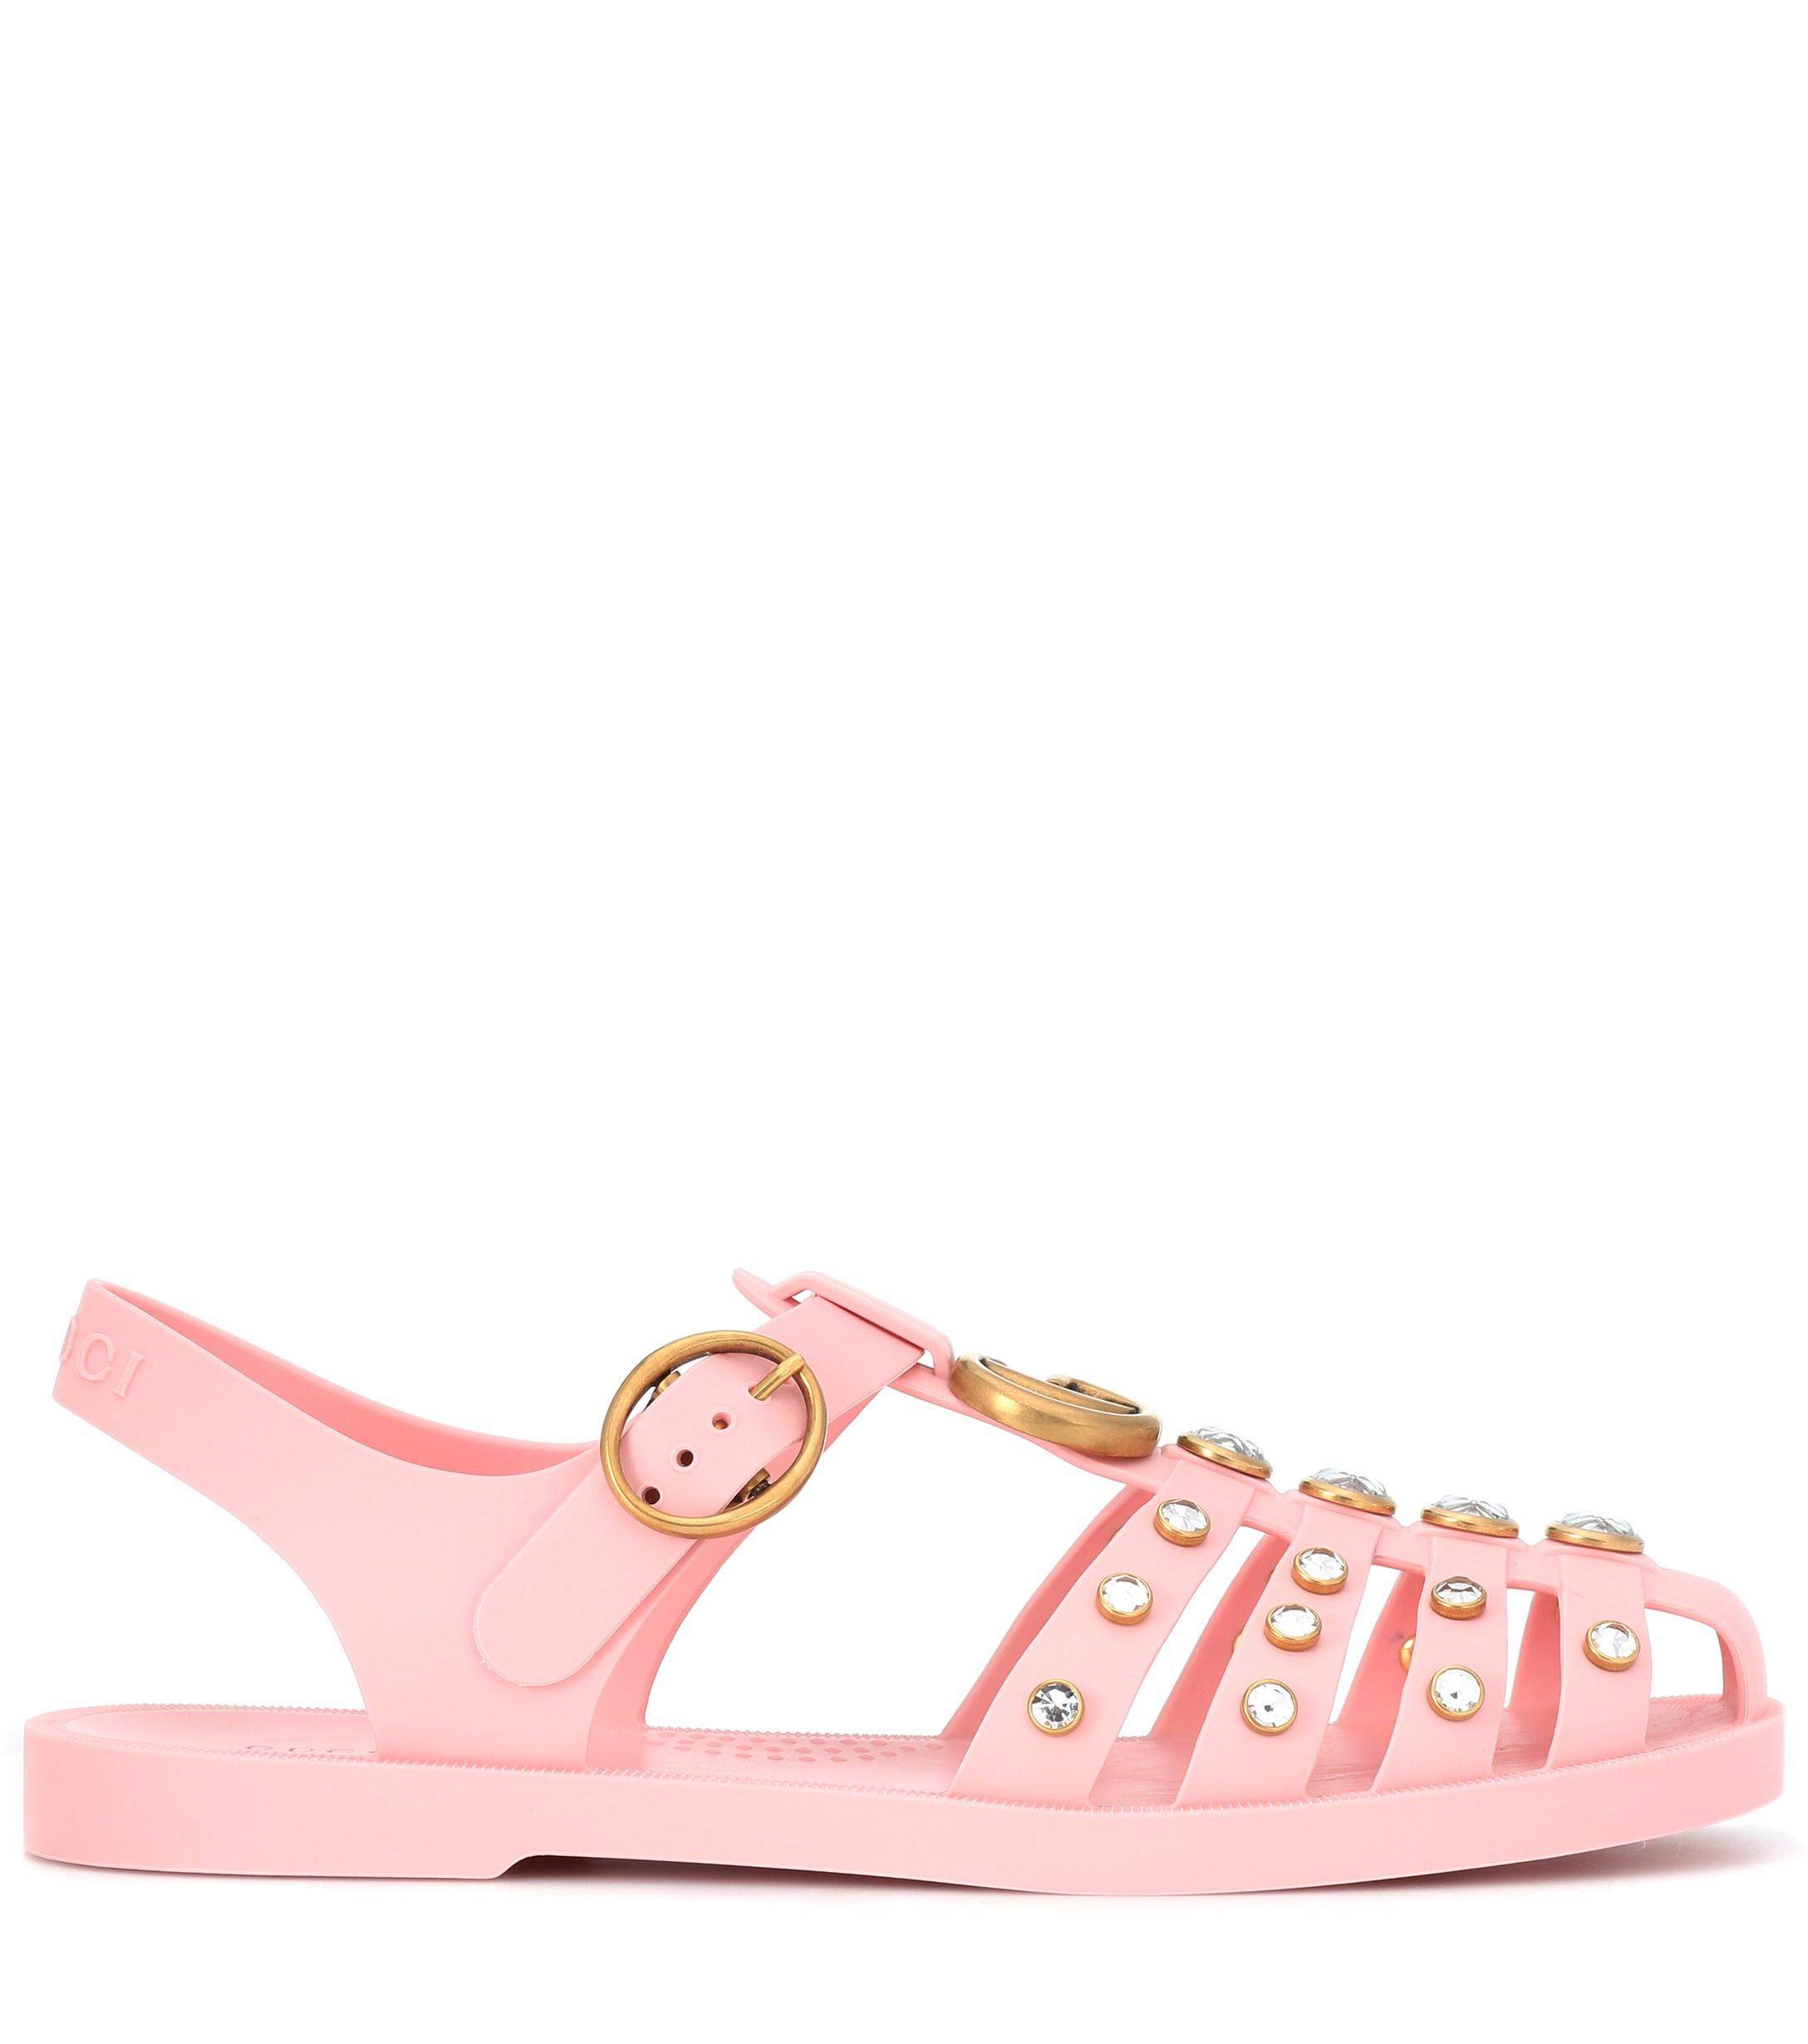 Gucci Crystal-embellished Jelly Sandals in Pink | Lyst